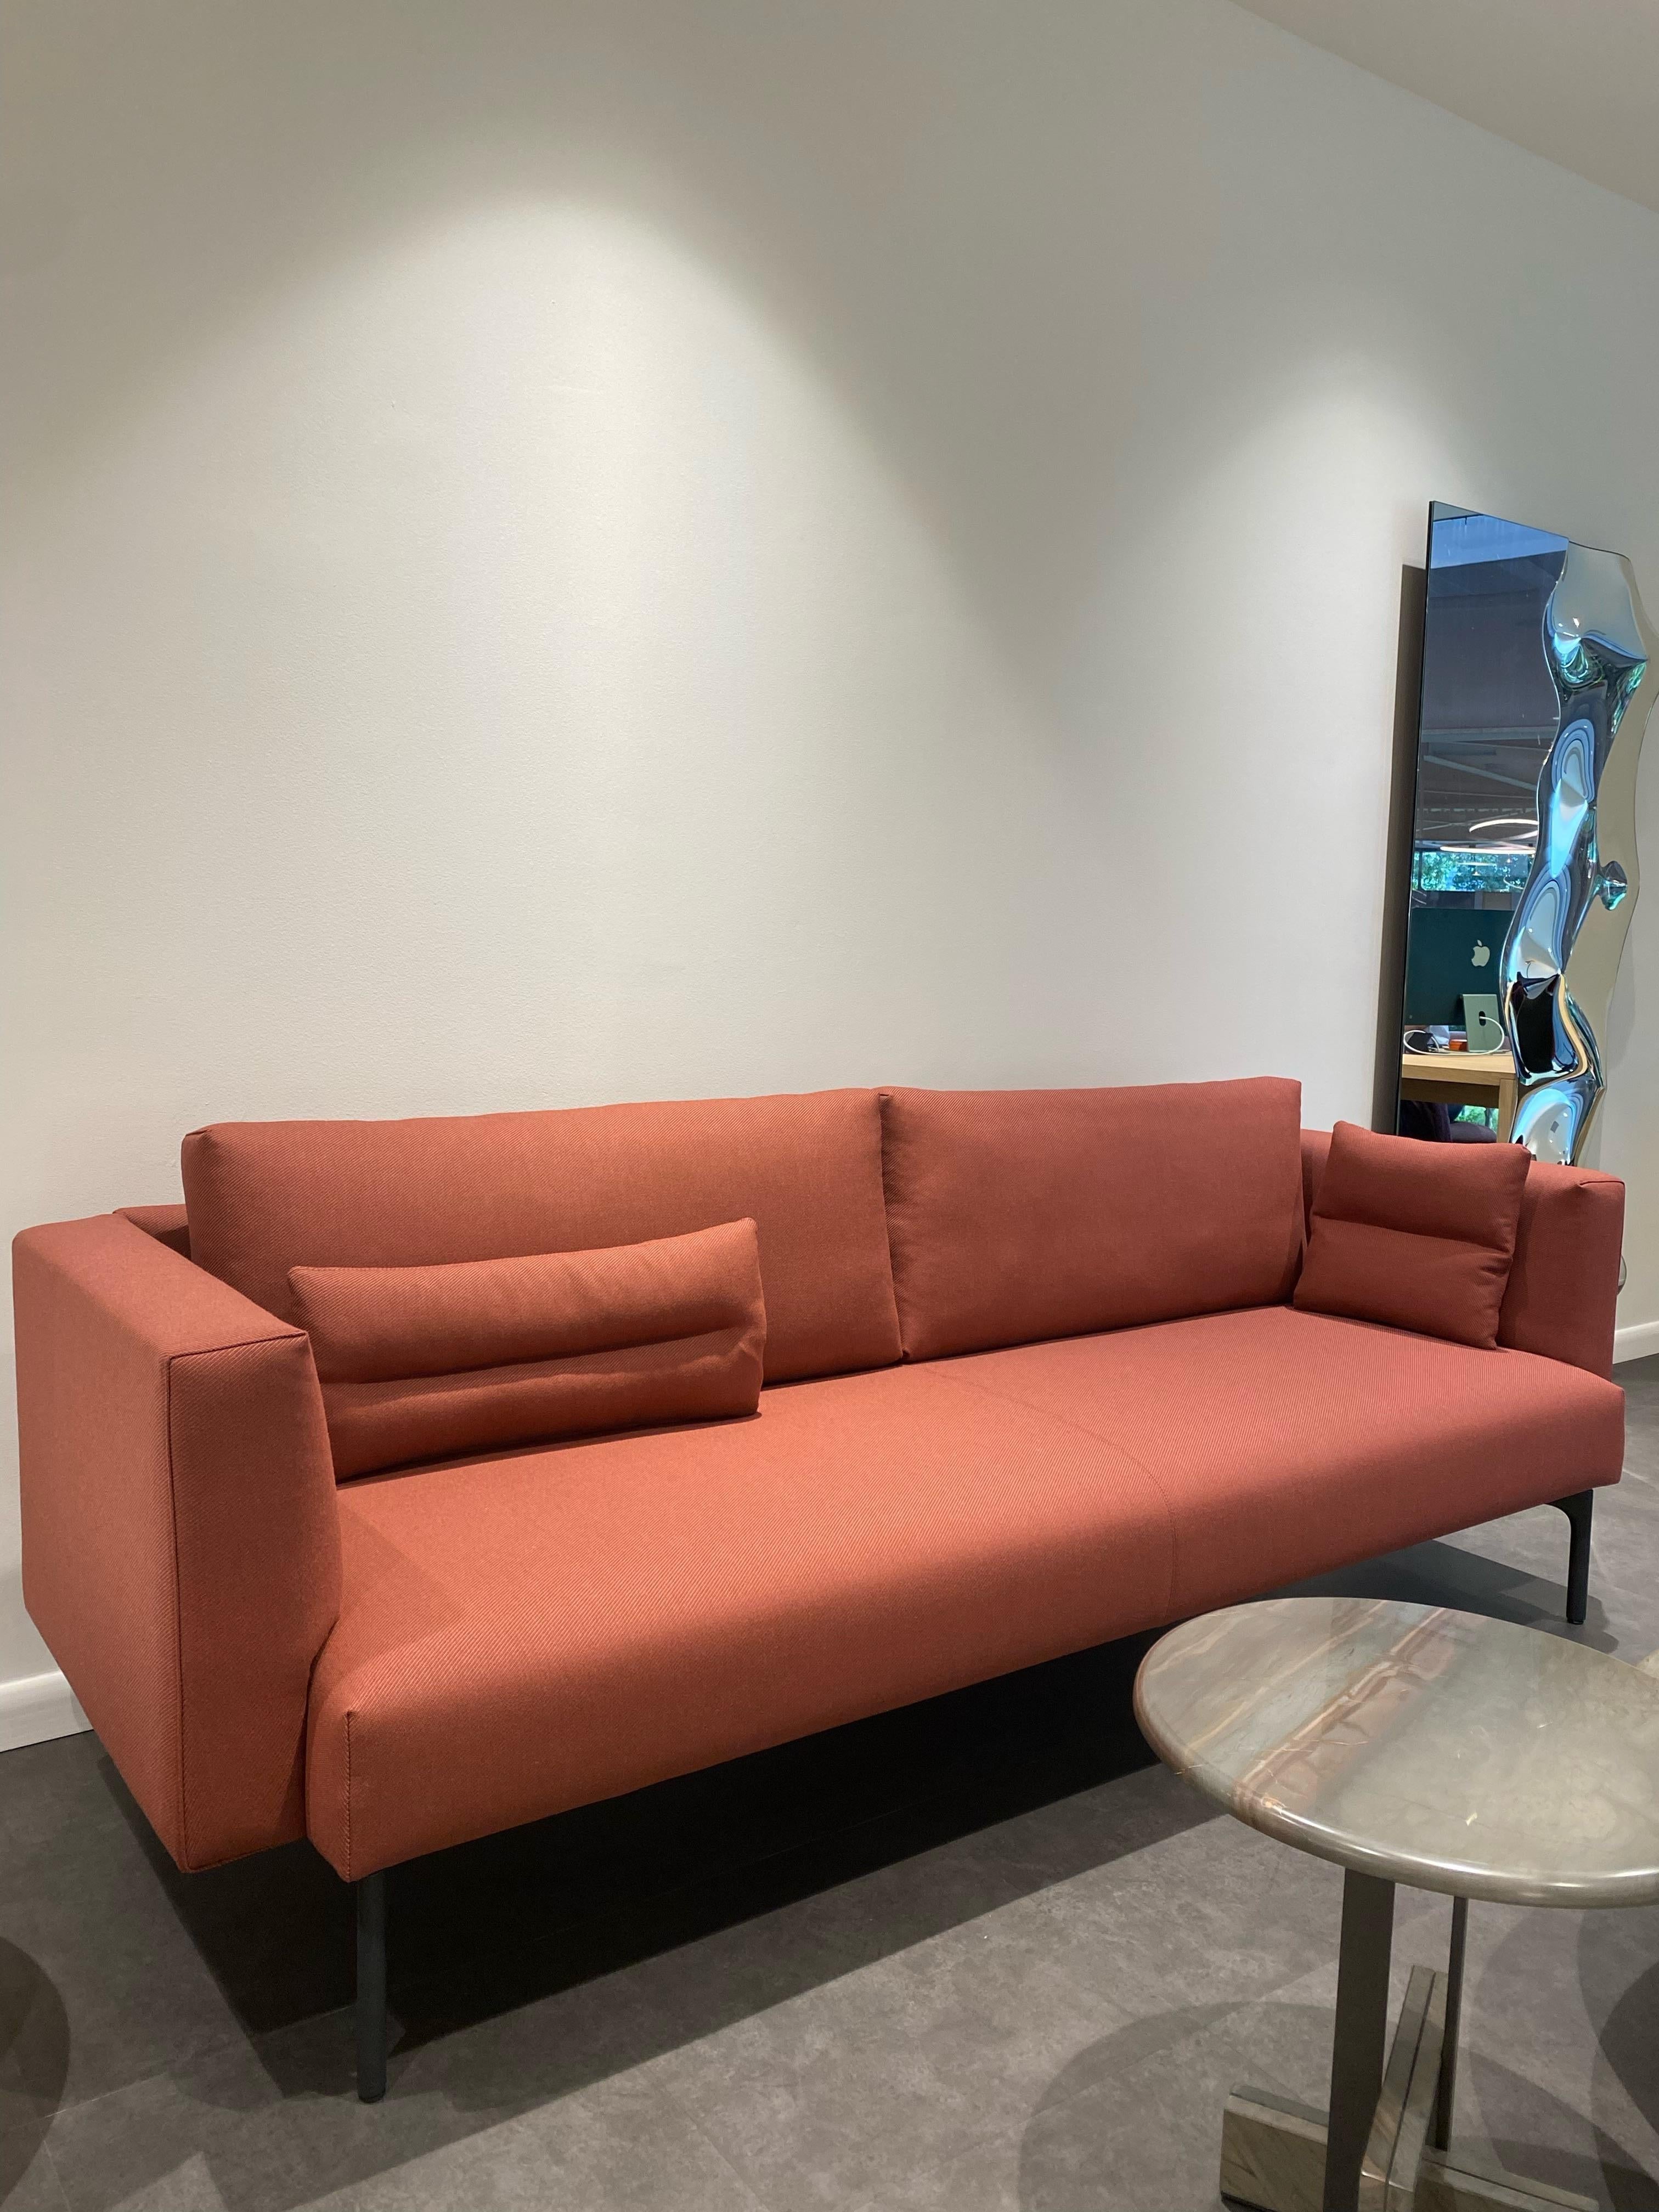 Arris BA 402 sofa 3-seater wide arms
Fabric not standard(name
fabric/colour/supplier) Twill
Weave by Kvadrat (FF) color 570

Height seat 43cm
Powdercoat colour P57 / Black grey RAL 7021
(structure)
Gliders Plastic gliders
Cushions included in the